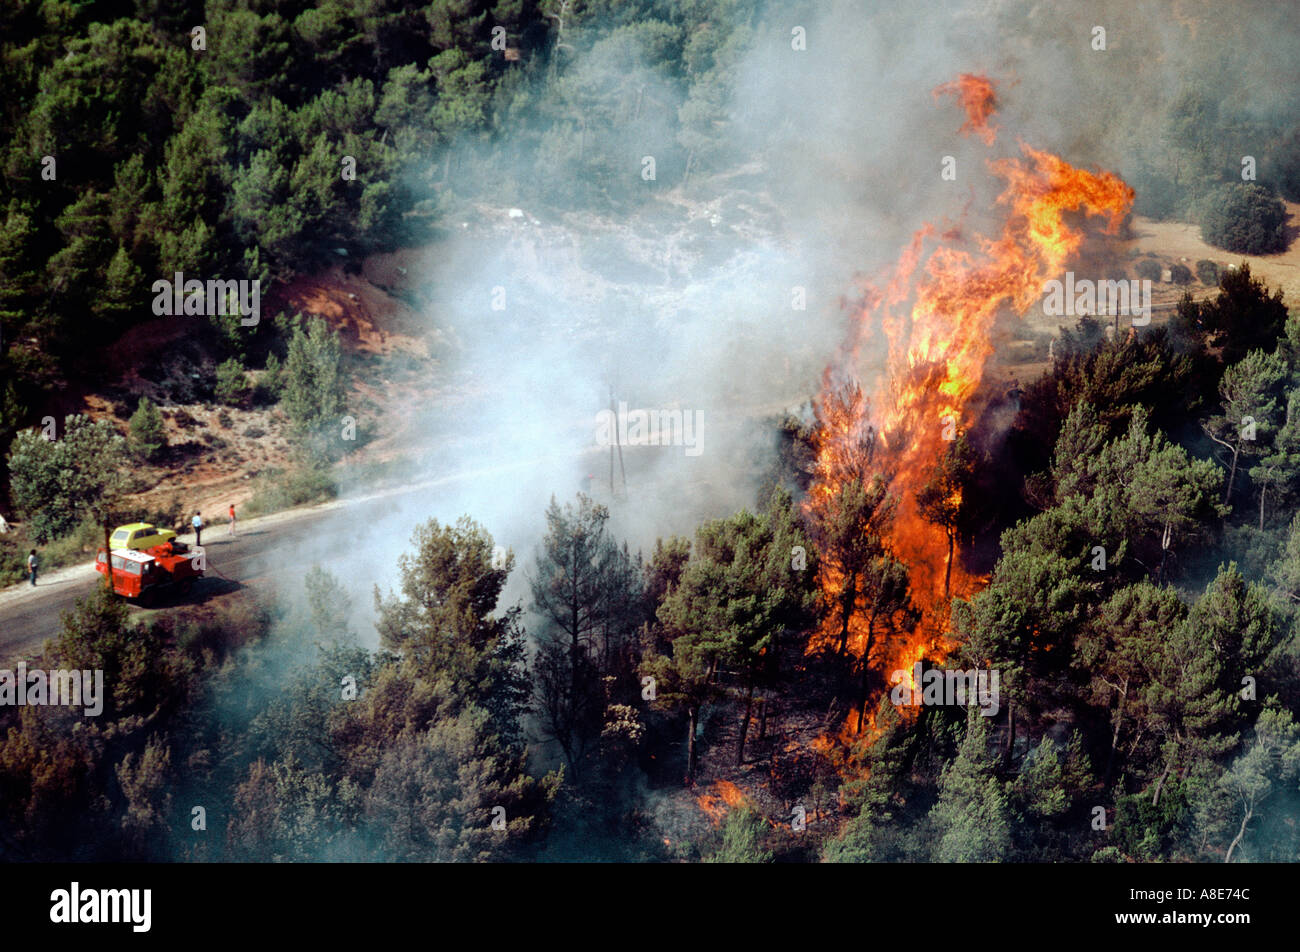 Aerial view of a wildfire, forest fire flames and smoke, firemen lorry, Bouches-du-Rhône, Provence, France, Europe, Stock Photo